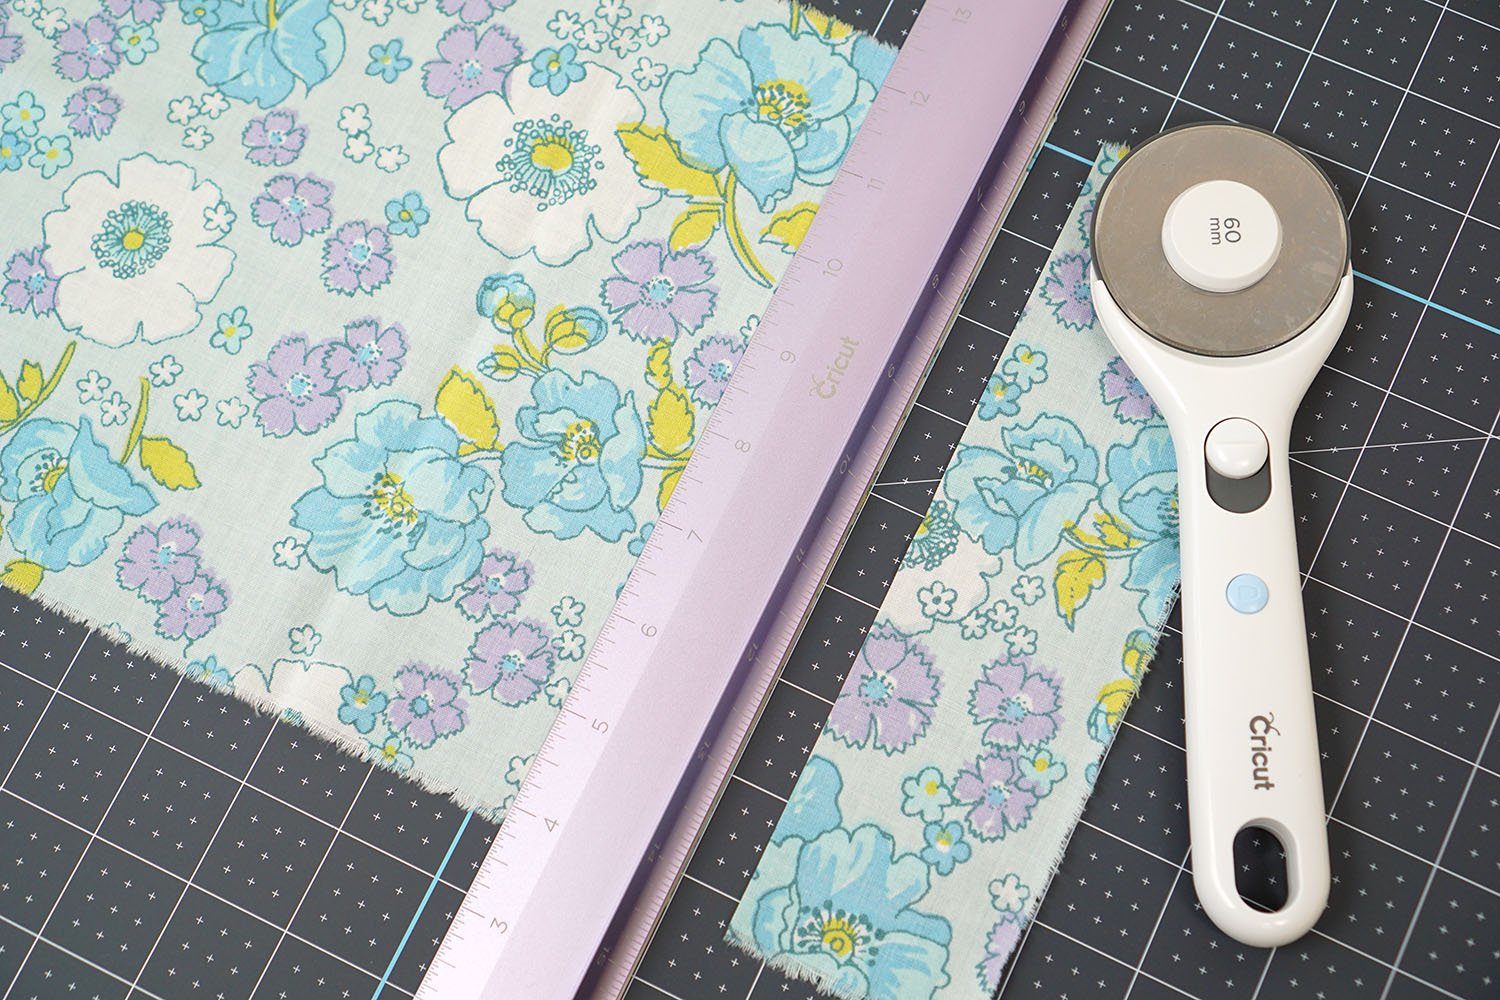 cricut cutting mat and acrylic ruler and rotary cutter